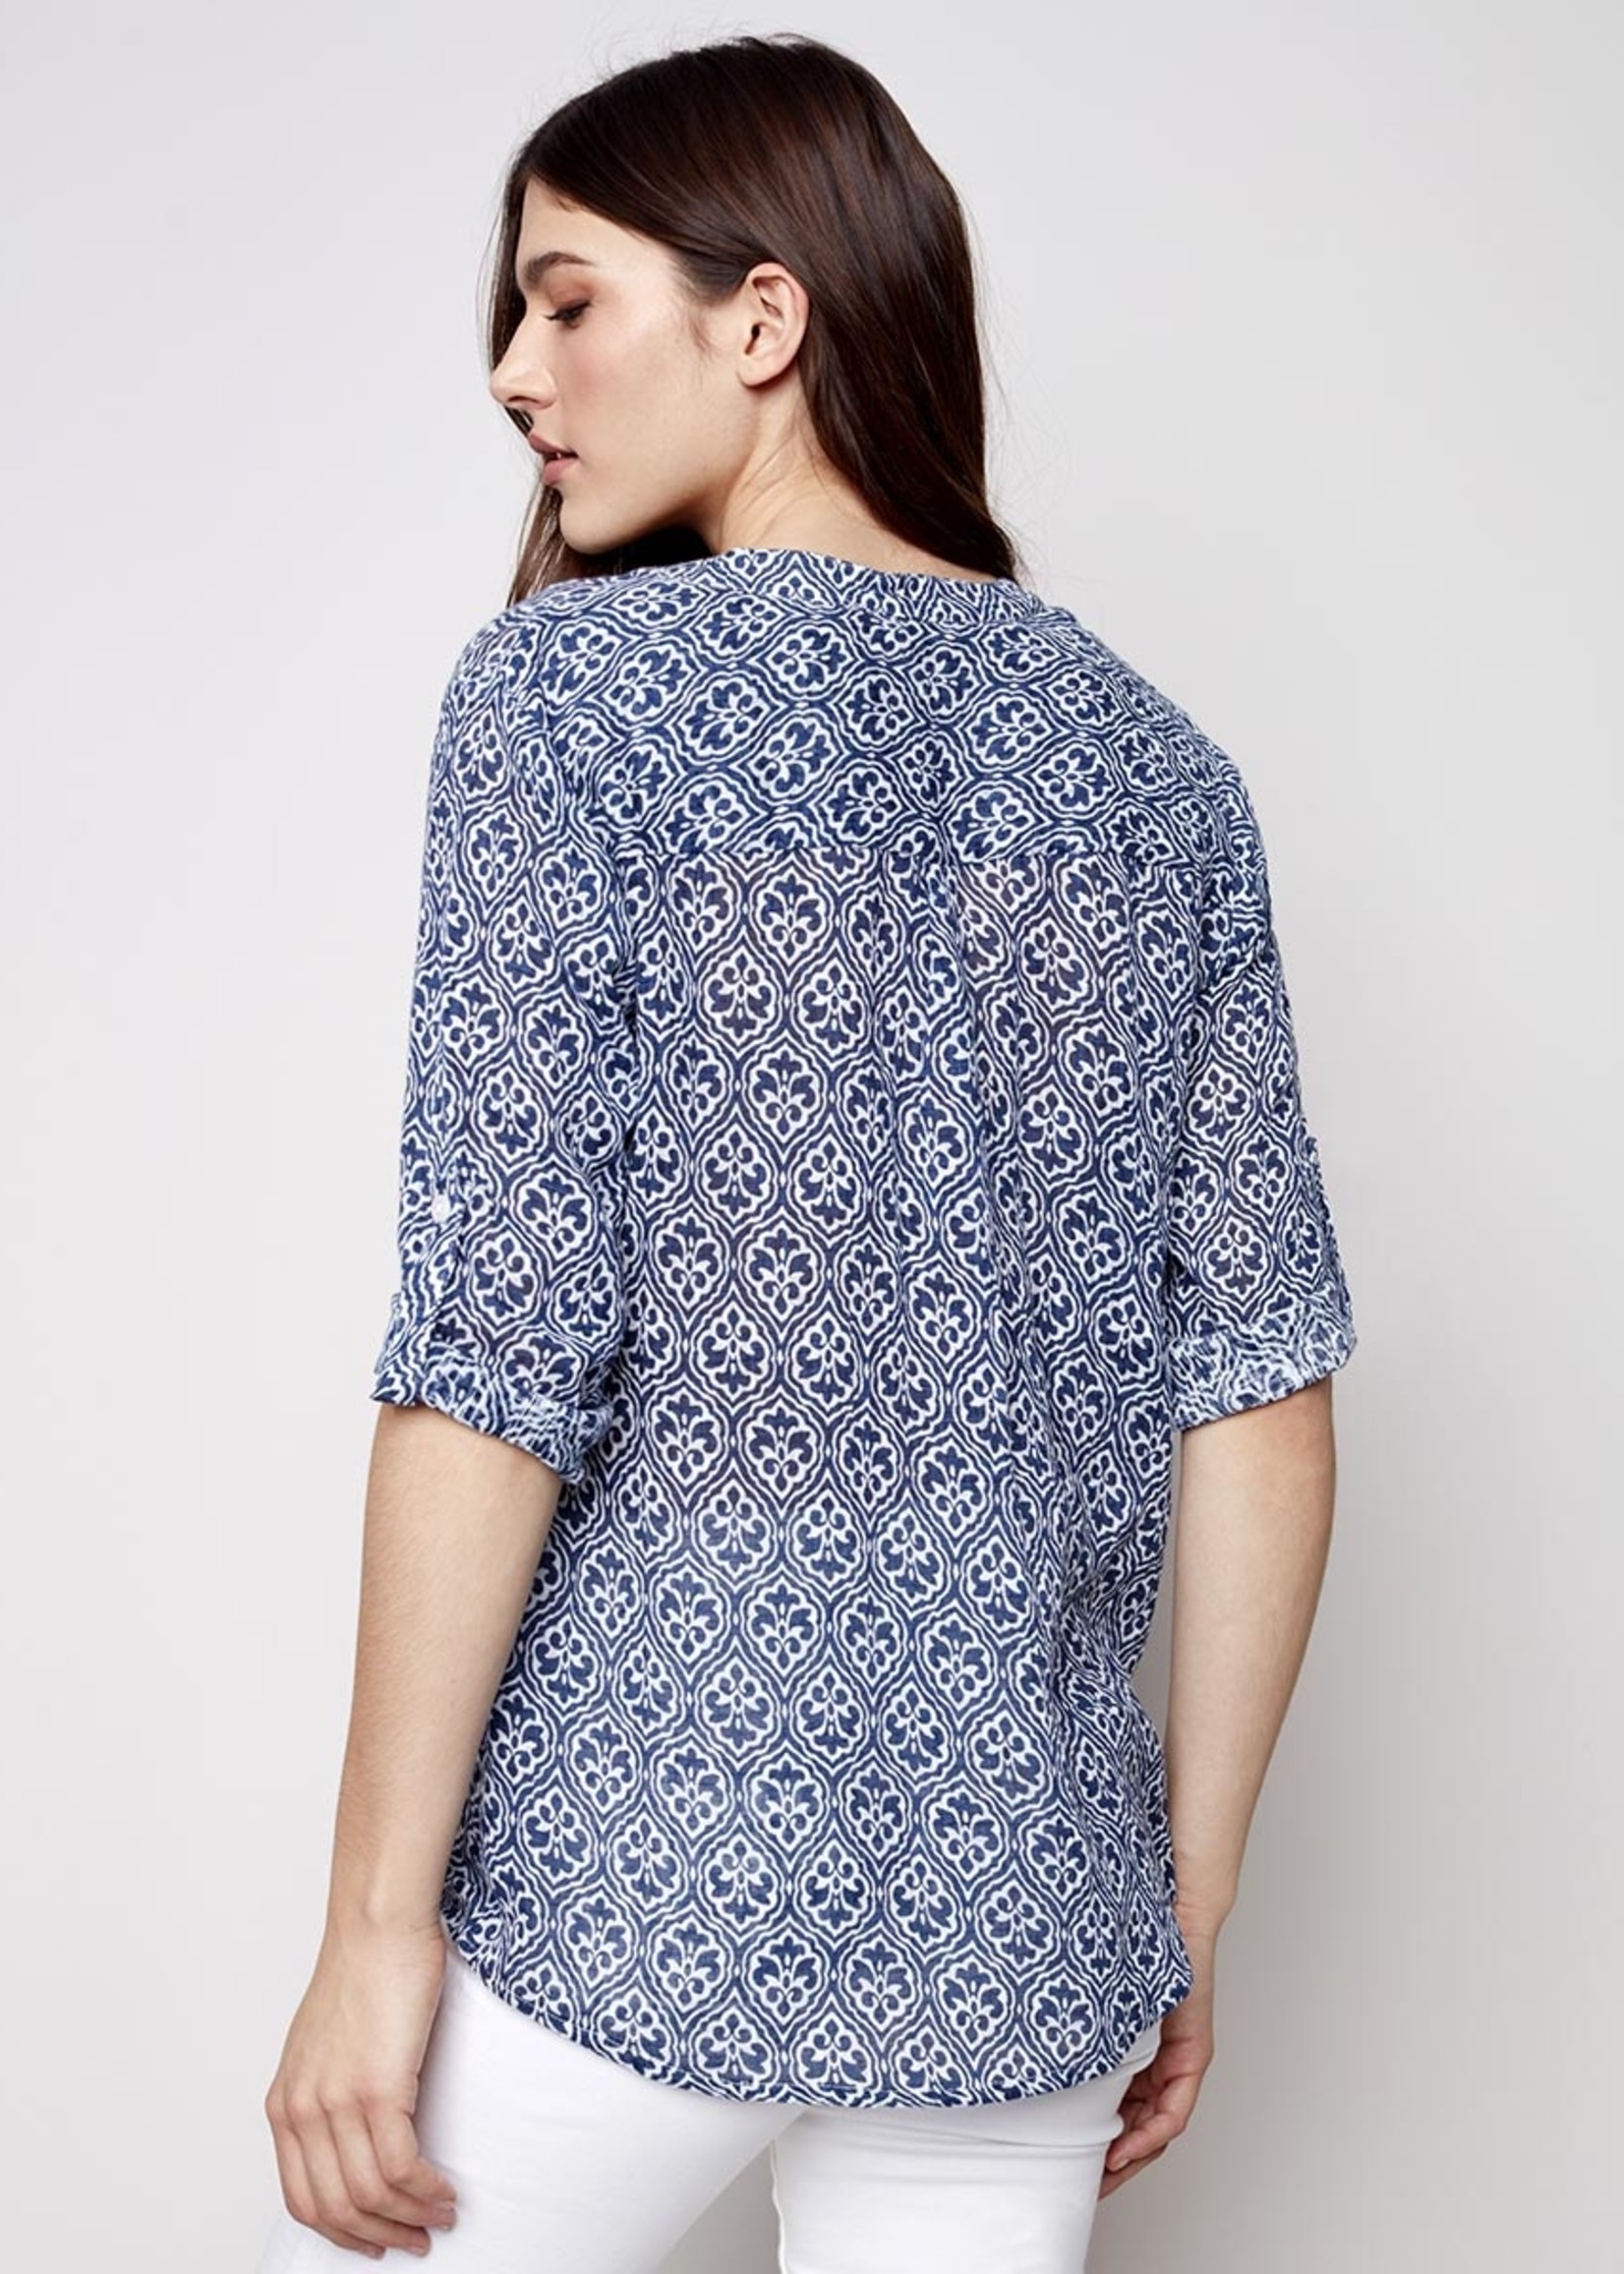 Charlie B Printed Roll Up Sleeve Blouse